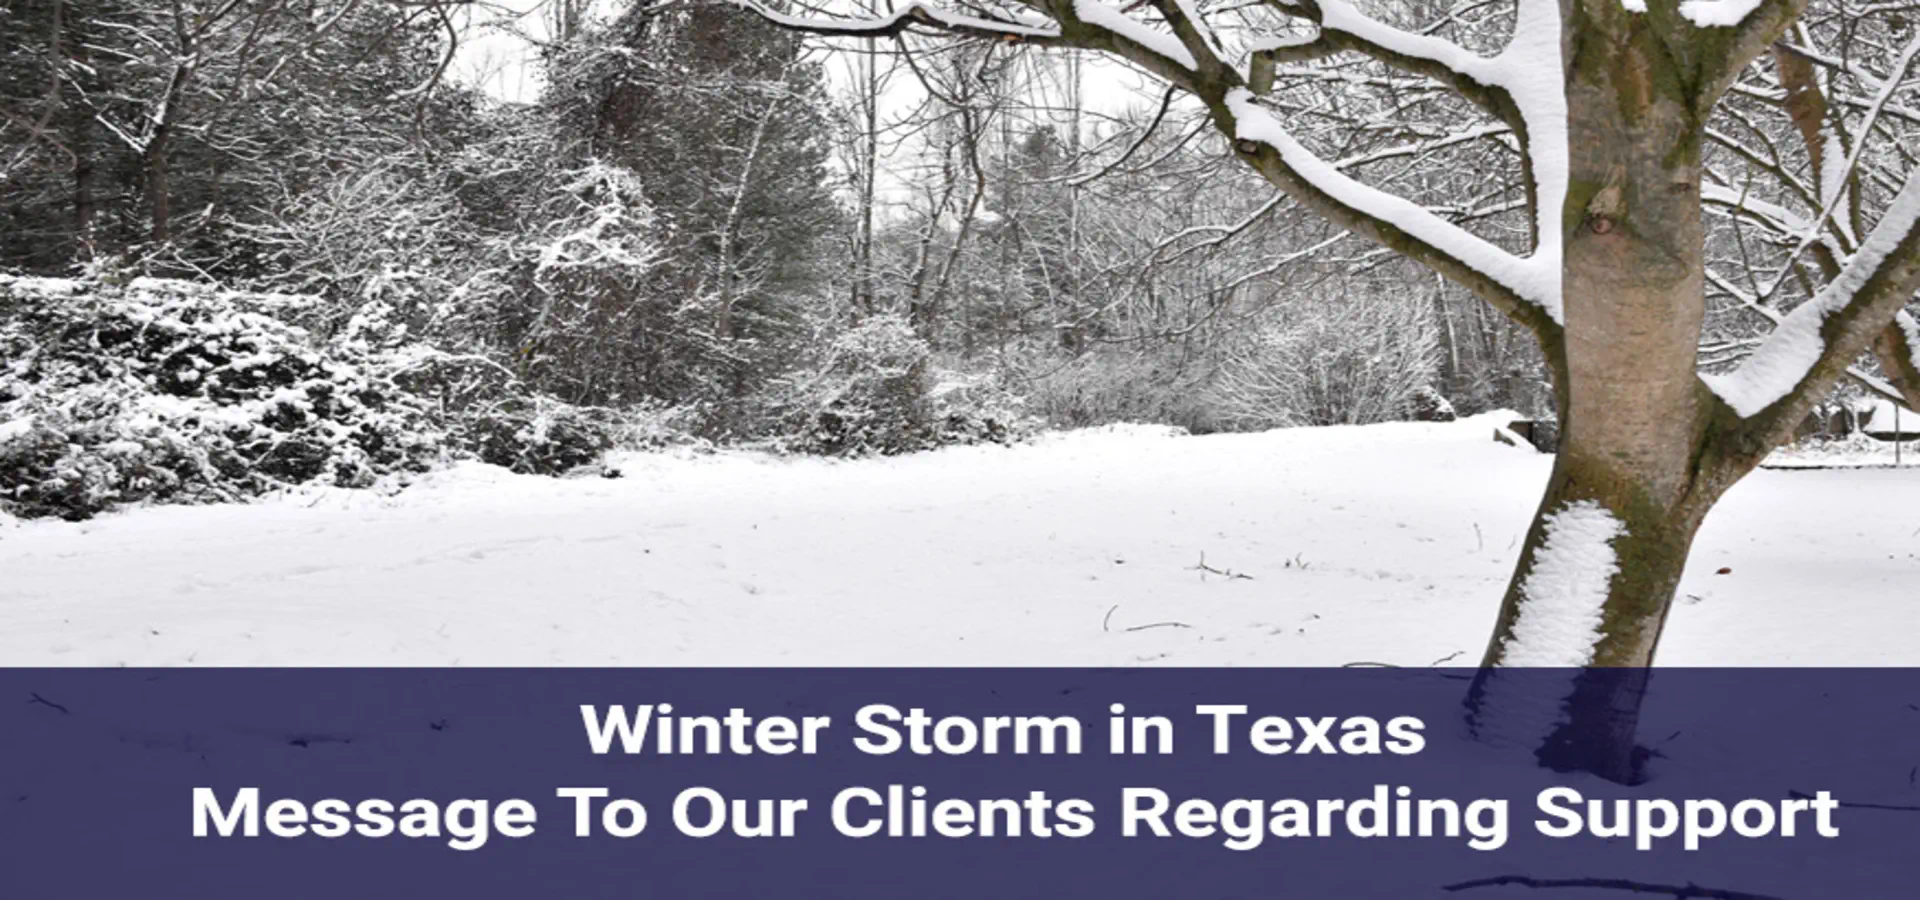 About Quorum - Winter Storm In Texas Message To Our Clients Regarding Support